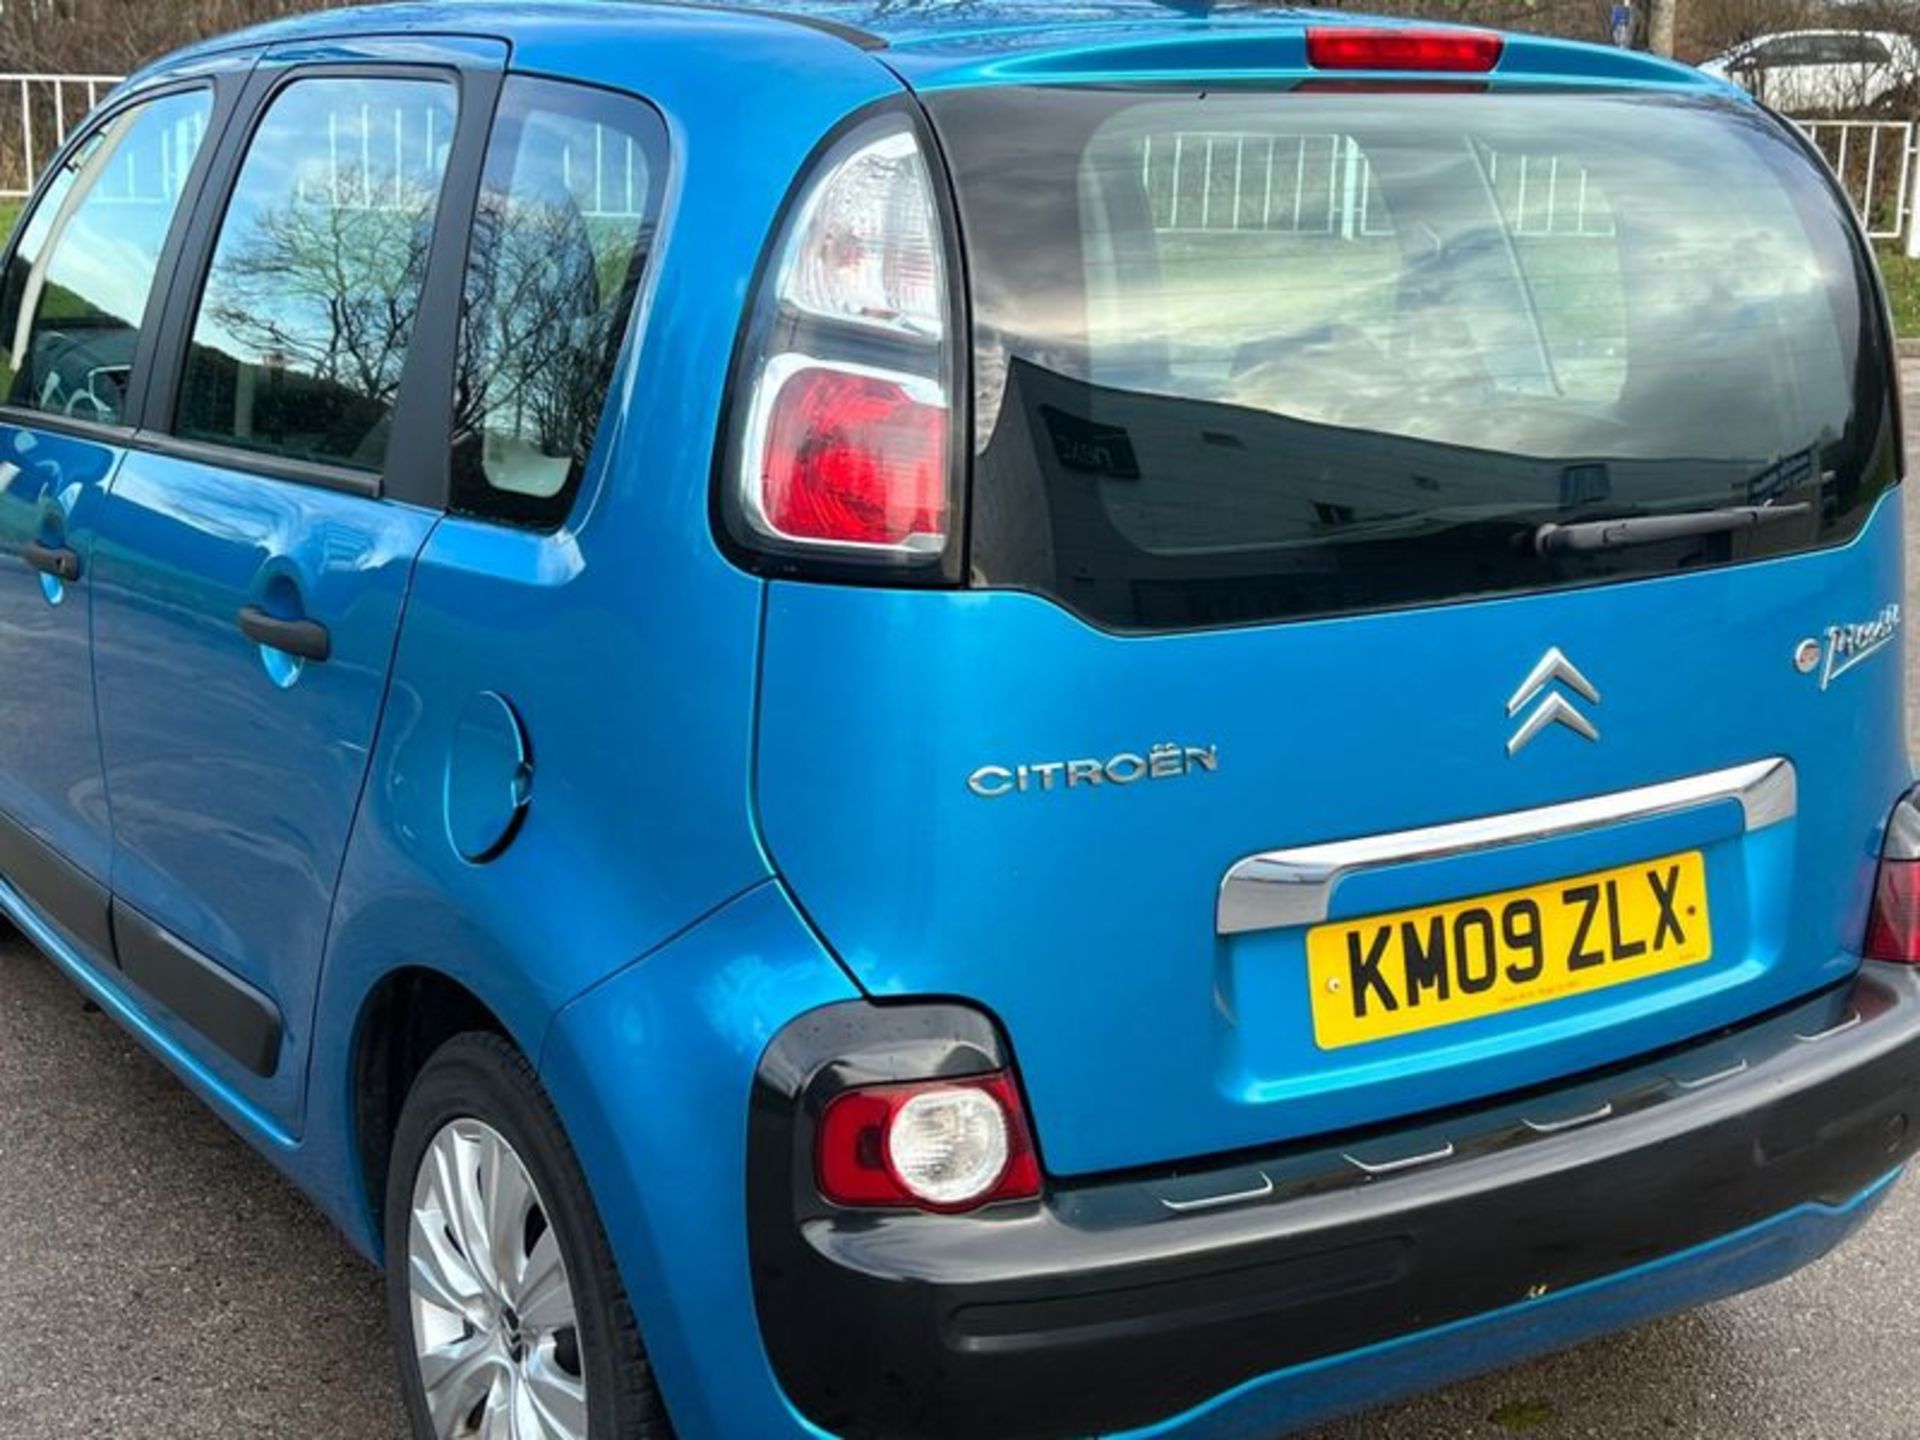 CITROEN C3 PICASSO 1.4 VTI VTR+ EURO 4 5DR 2009 (09 REG) - SPARES AND REPAIRS - Image 20 of 53